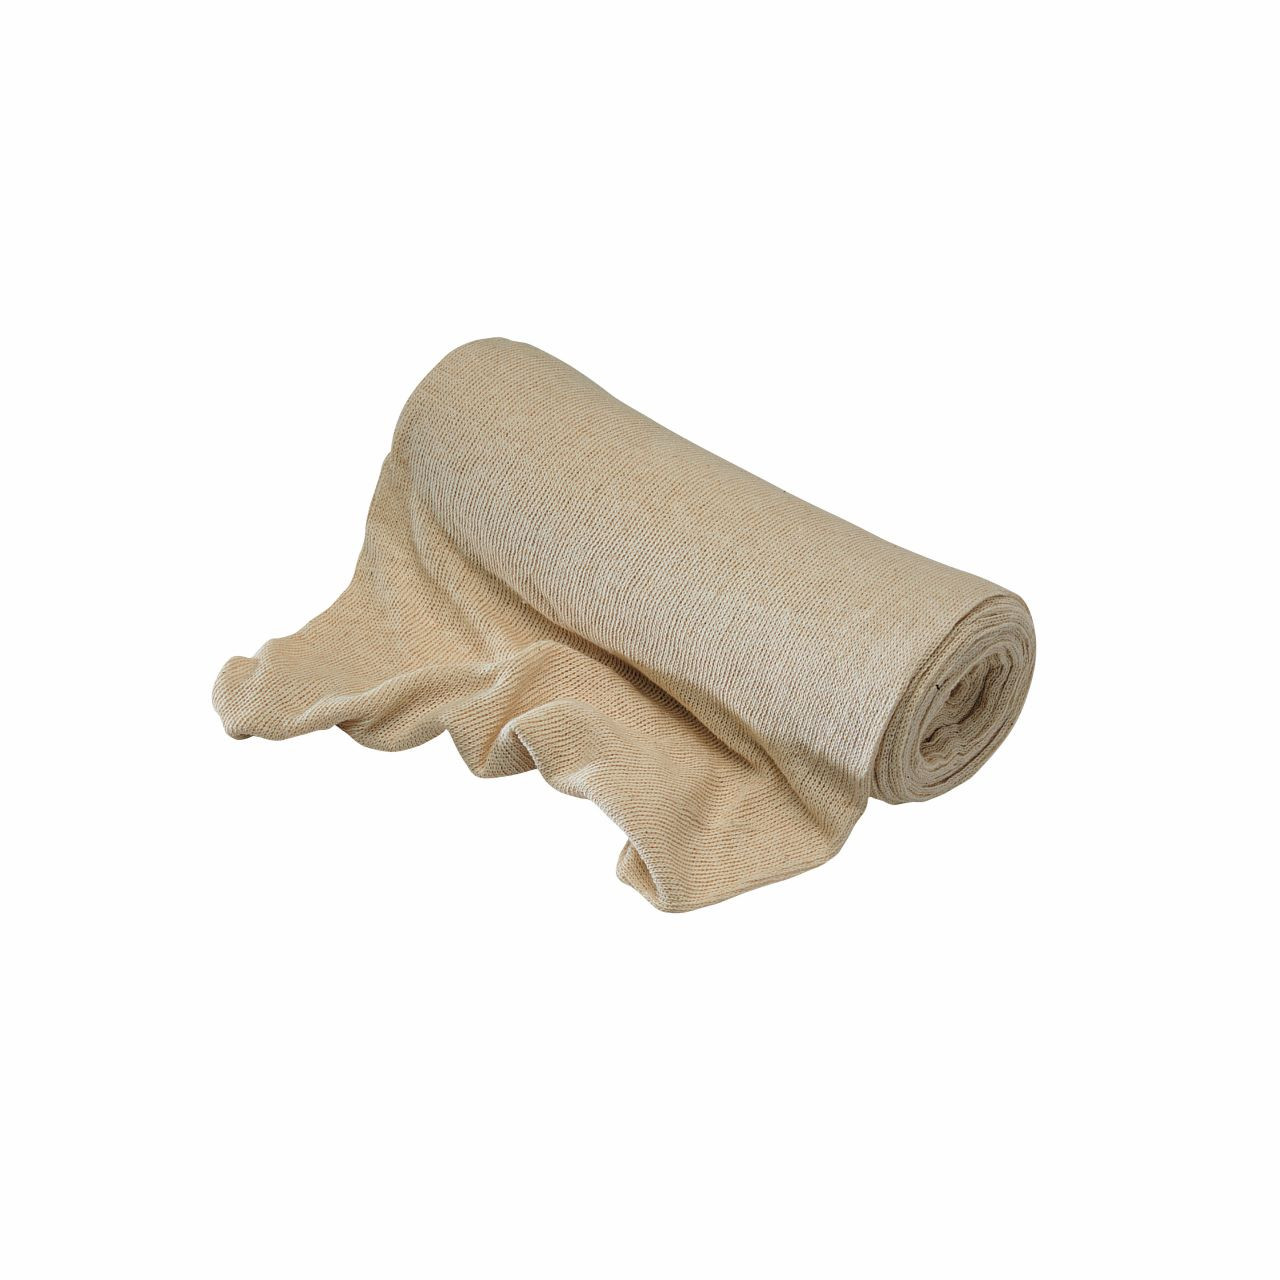 Photograph of Heavy Cotton Stockinette Roll 500g?